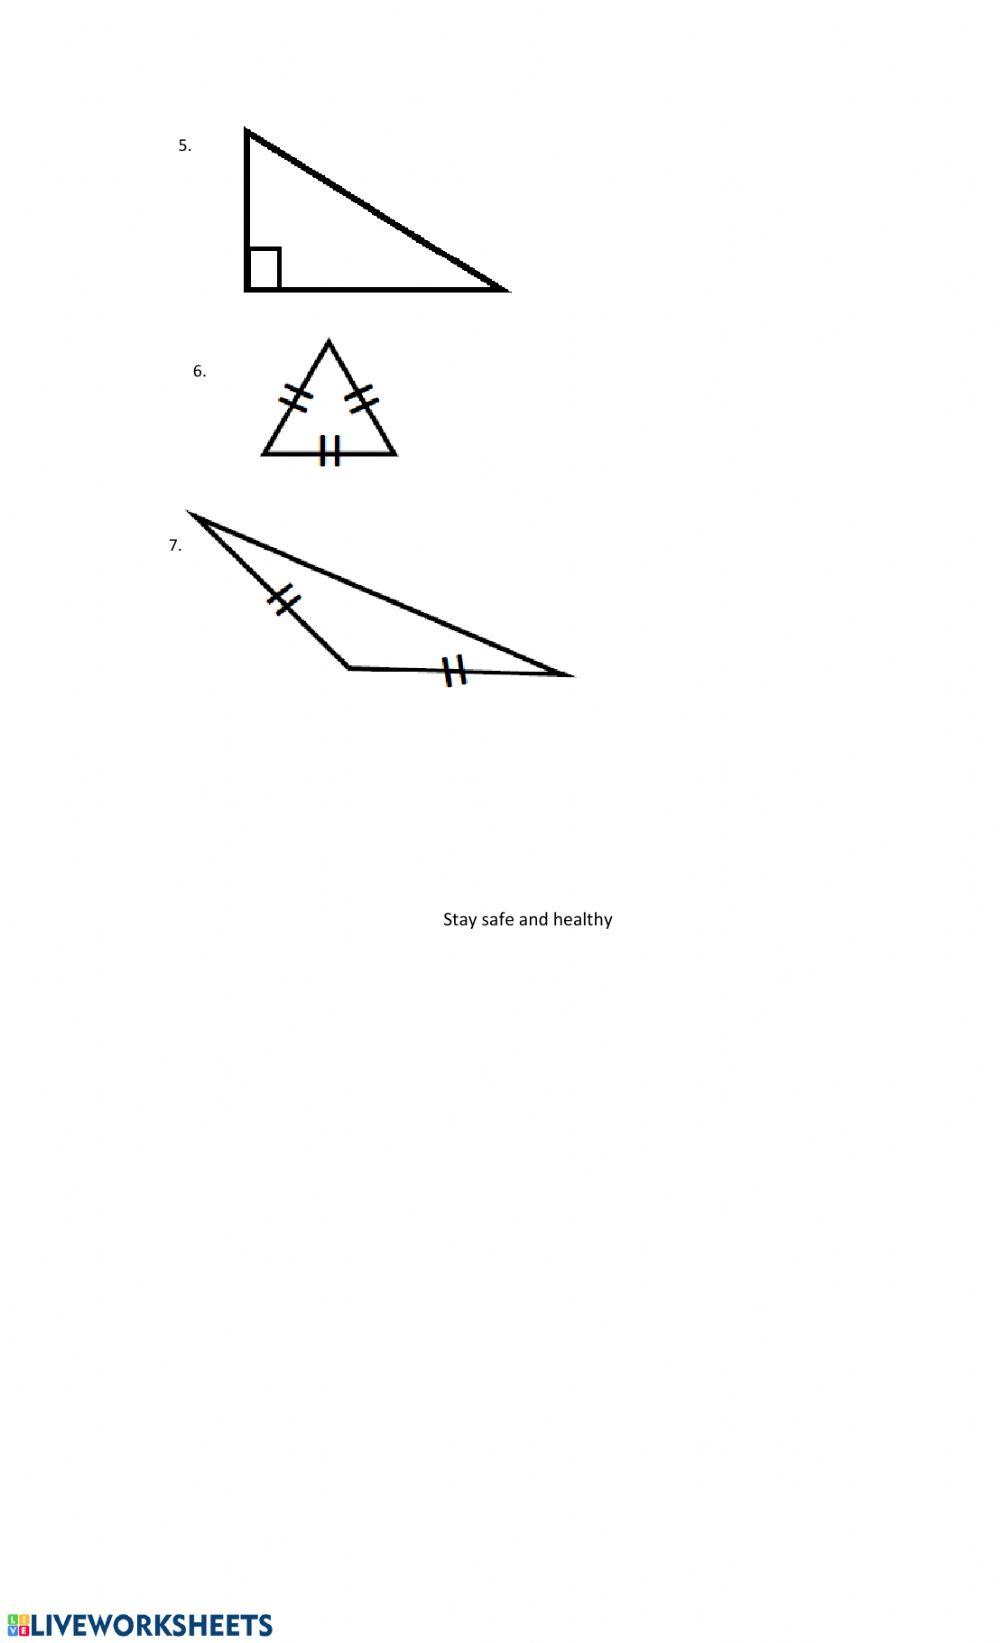 Classifying Triangles by Their Angles